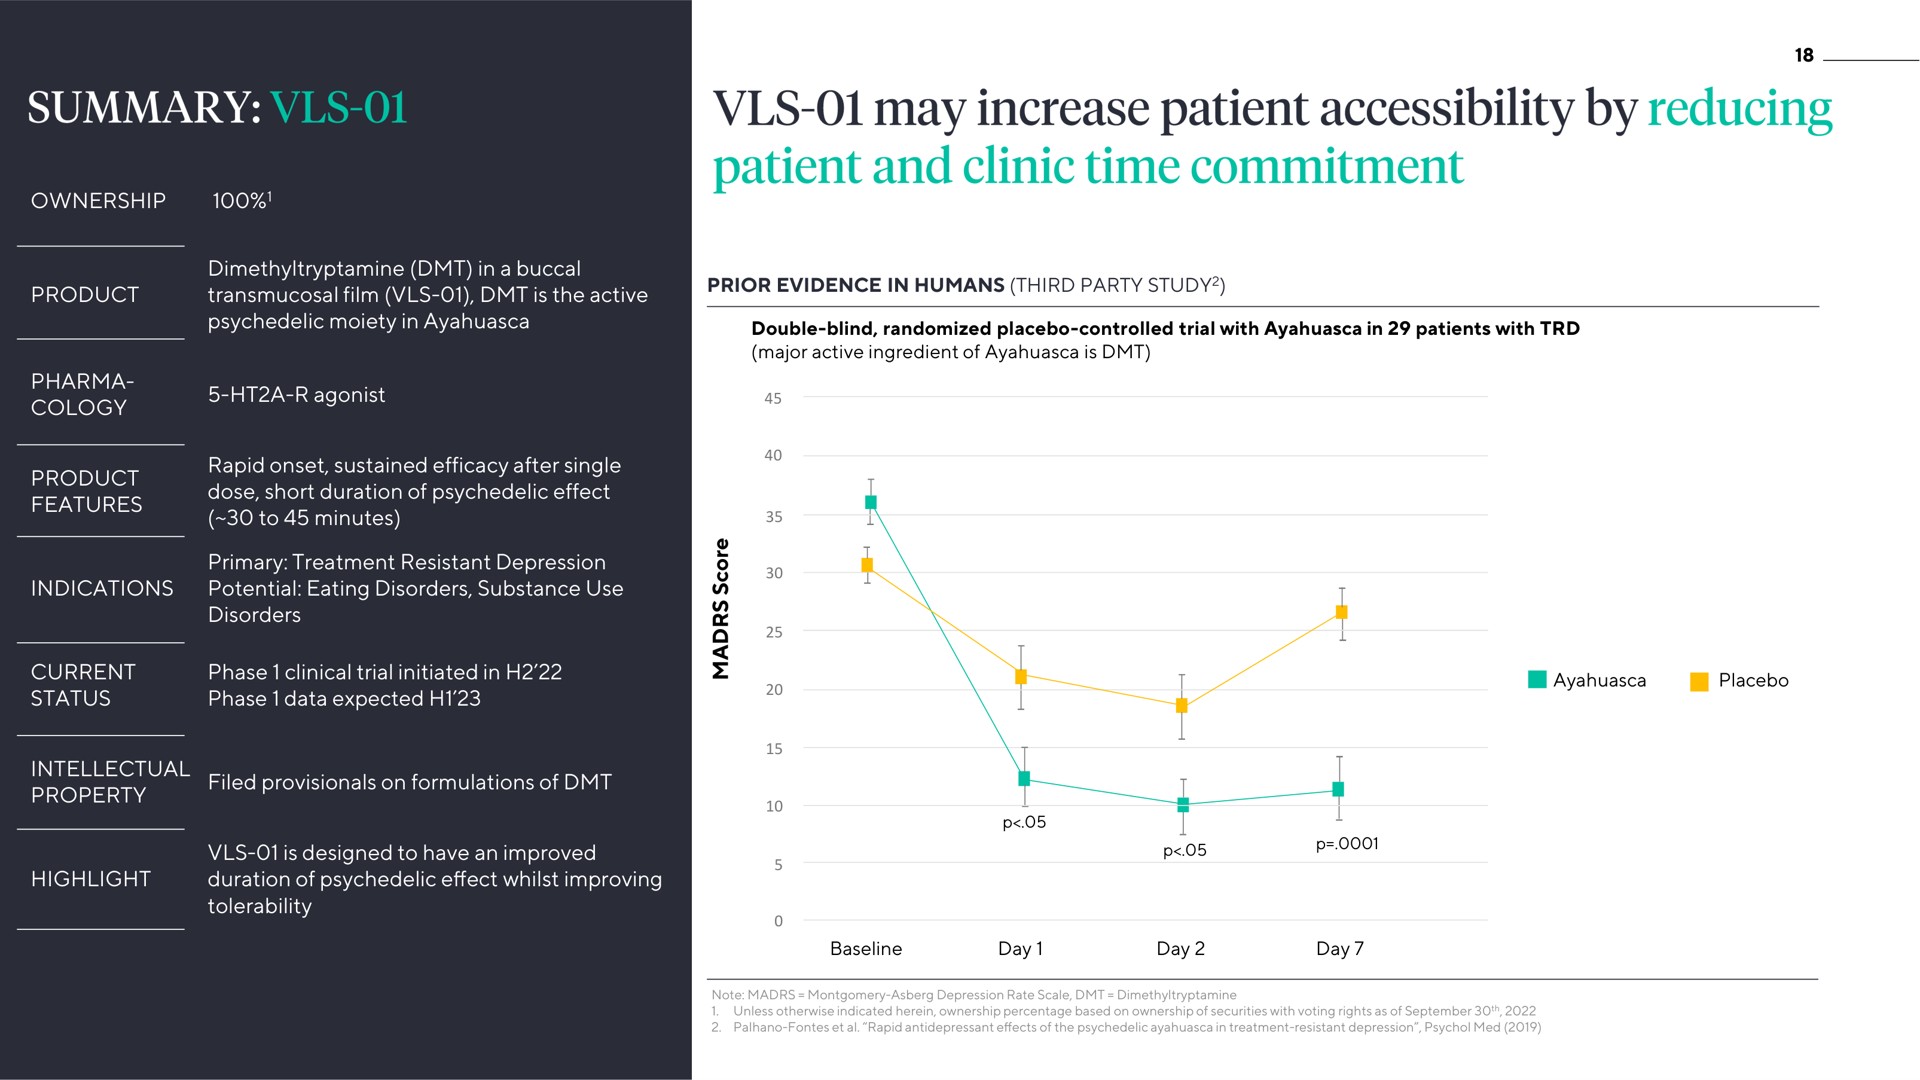 may increase patient accessibility by reducing patient and clinic time commitment | ATAI